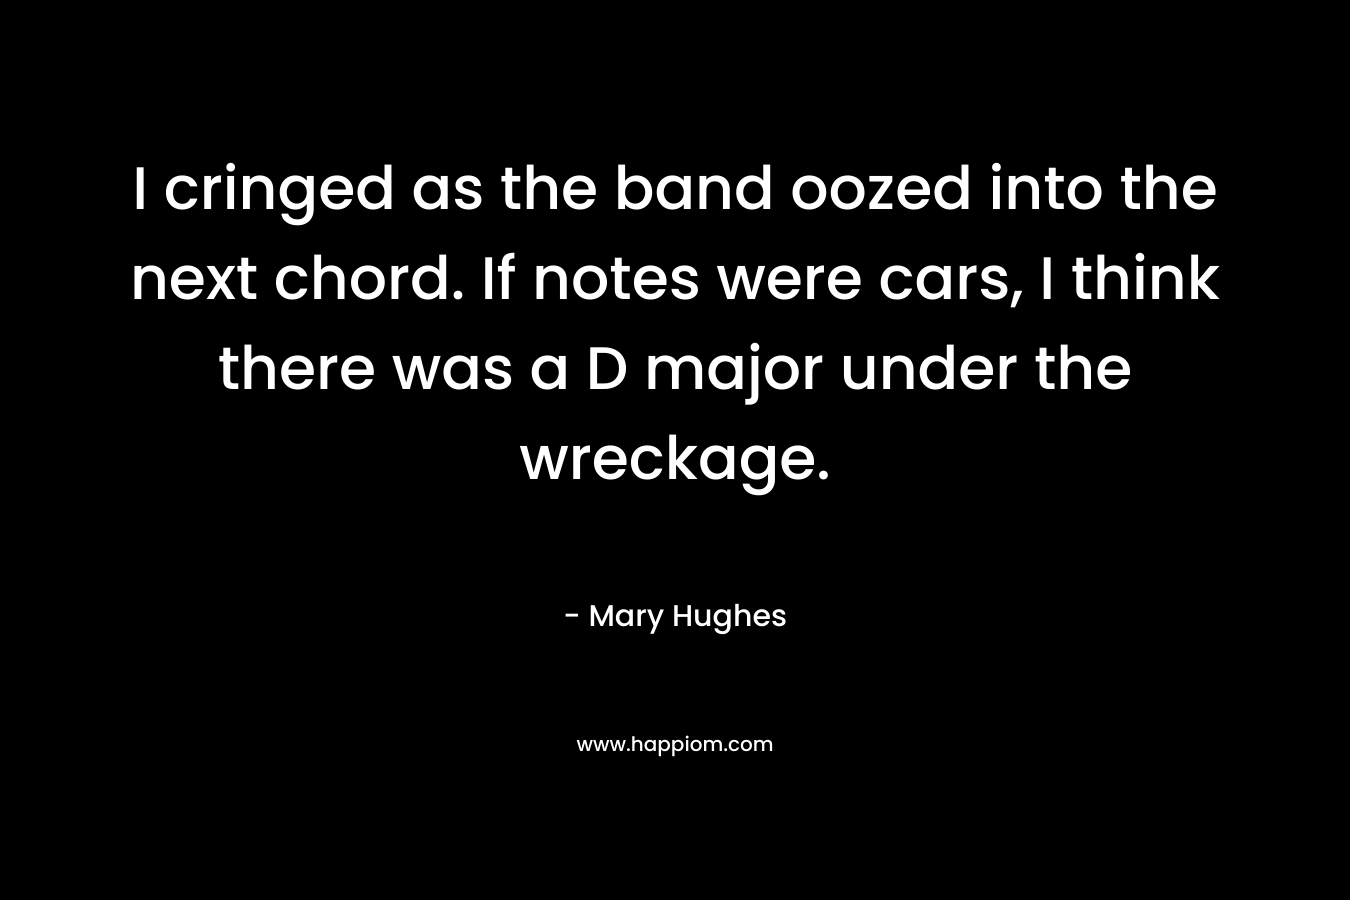 I cringed as the band oozed into the next chord. If notes were cars, I think there was a D major under the wreckage. – Mary Hughes